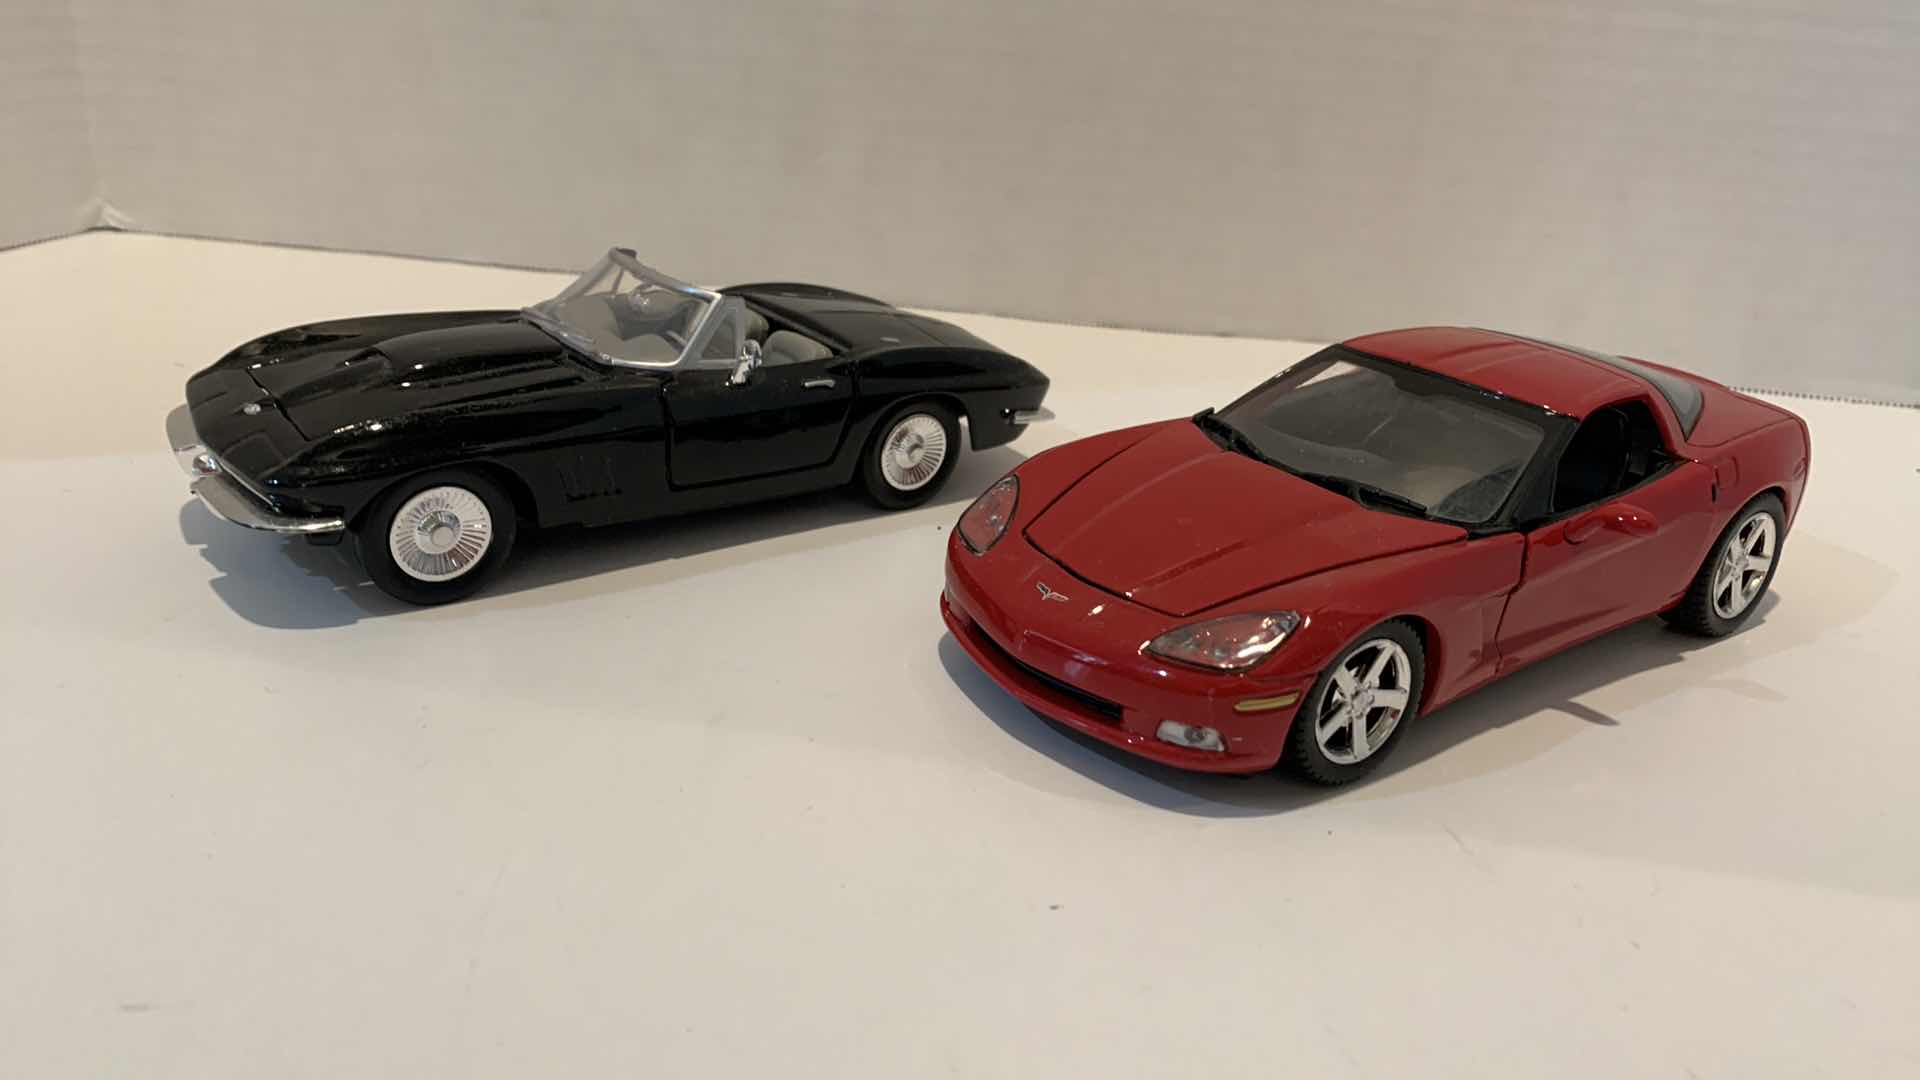 Photo 1 of 2 COLLECTABLE CARS 67 CORVETTE